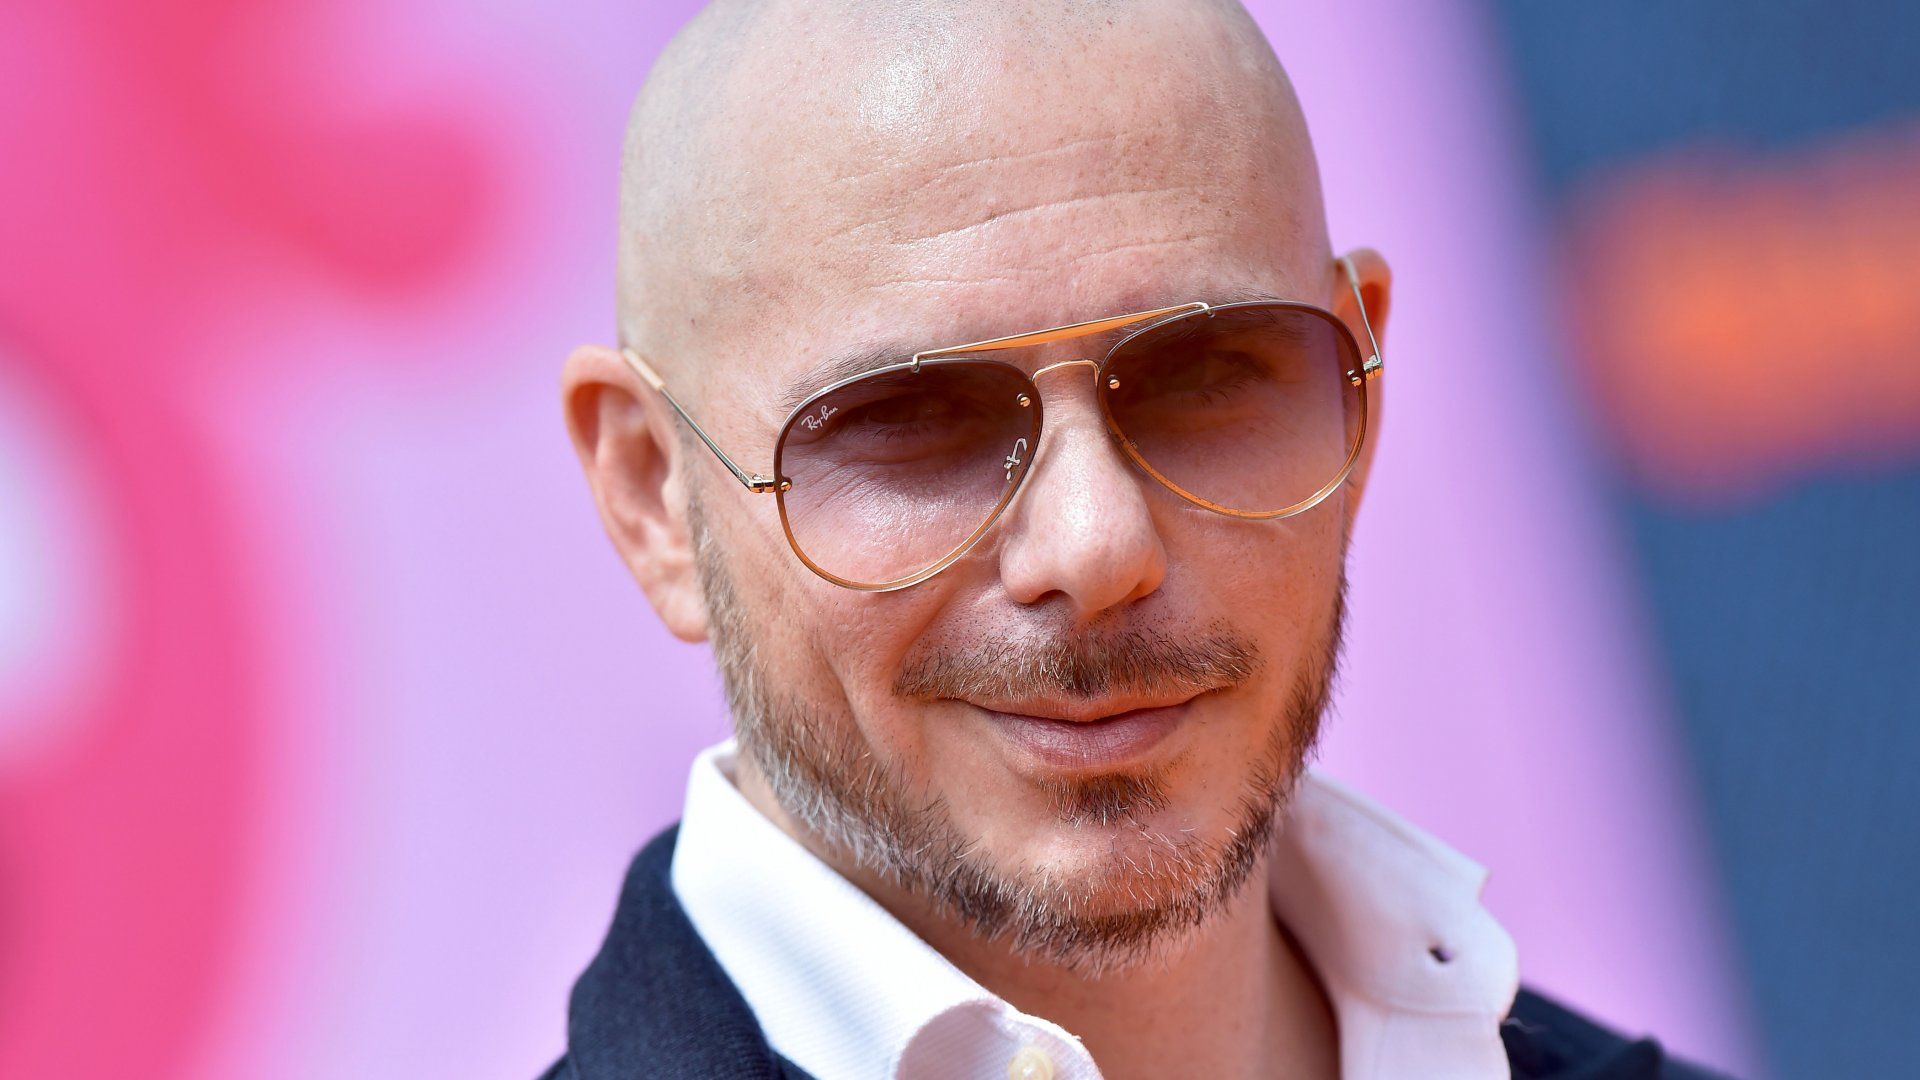 Pitbull Steps Up for Latino Business Owners